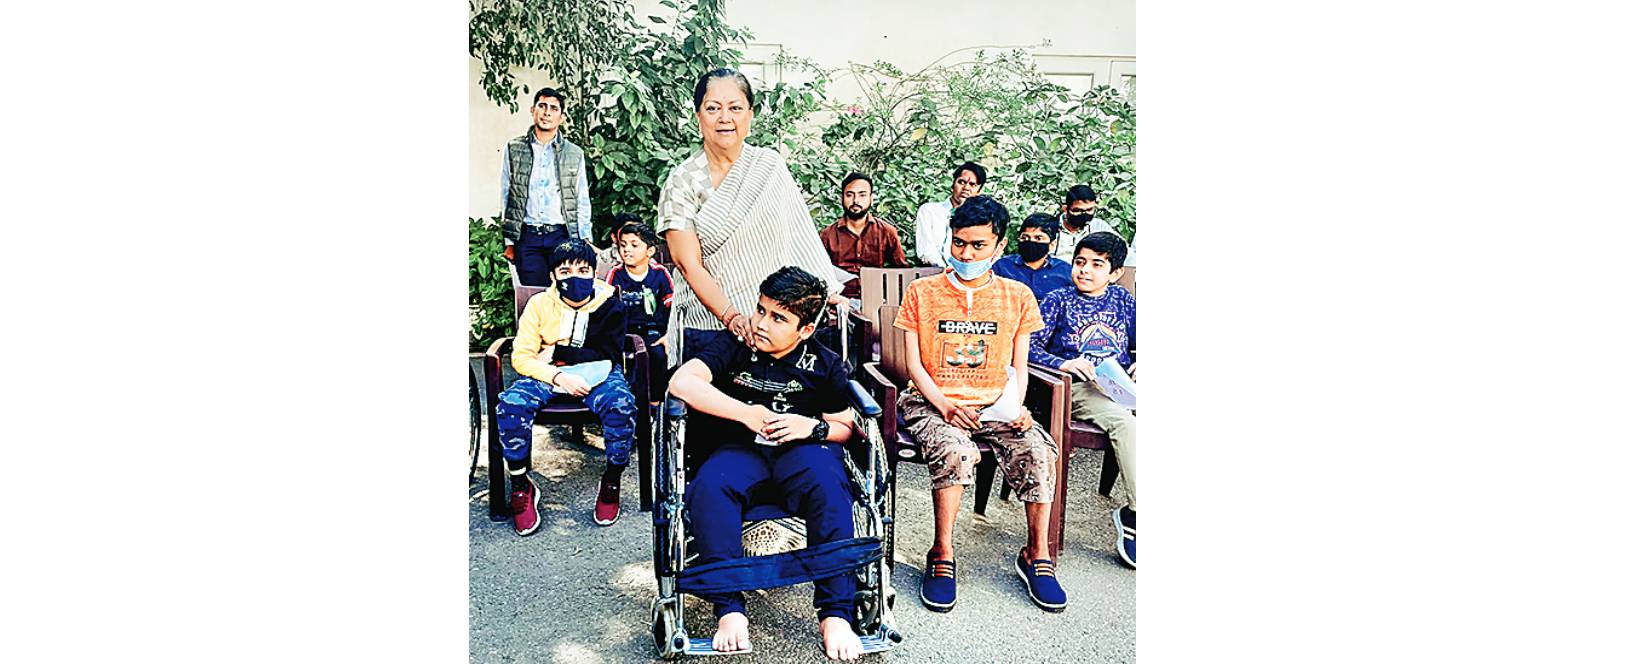 Raje gets emotional meeting kids with muscular dystrophy, assures all help